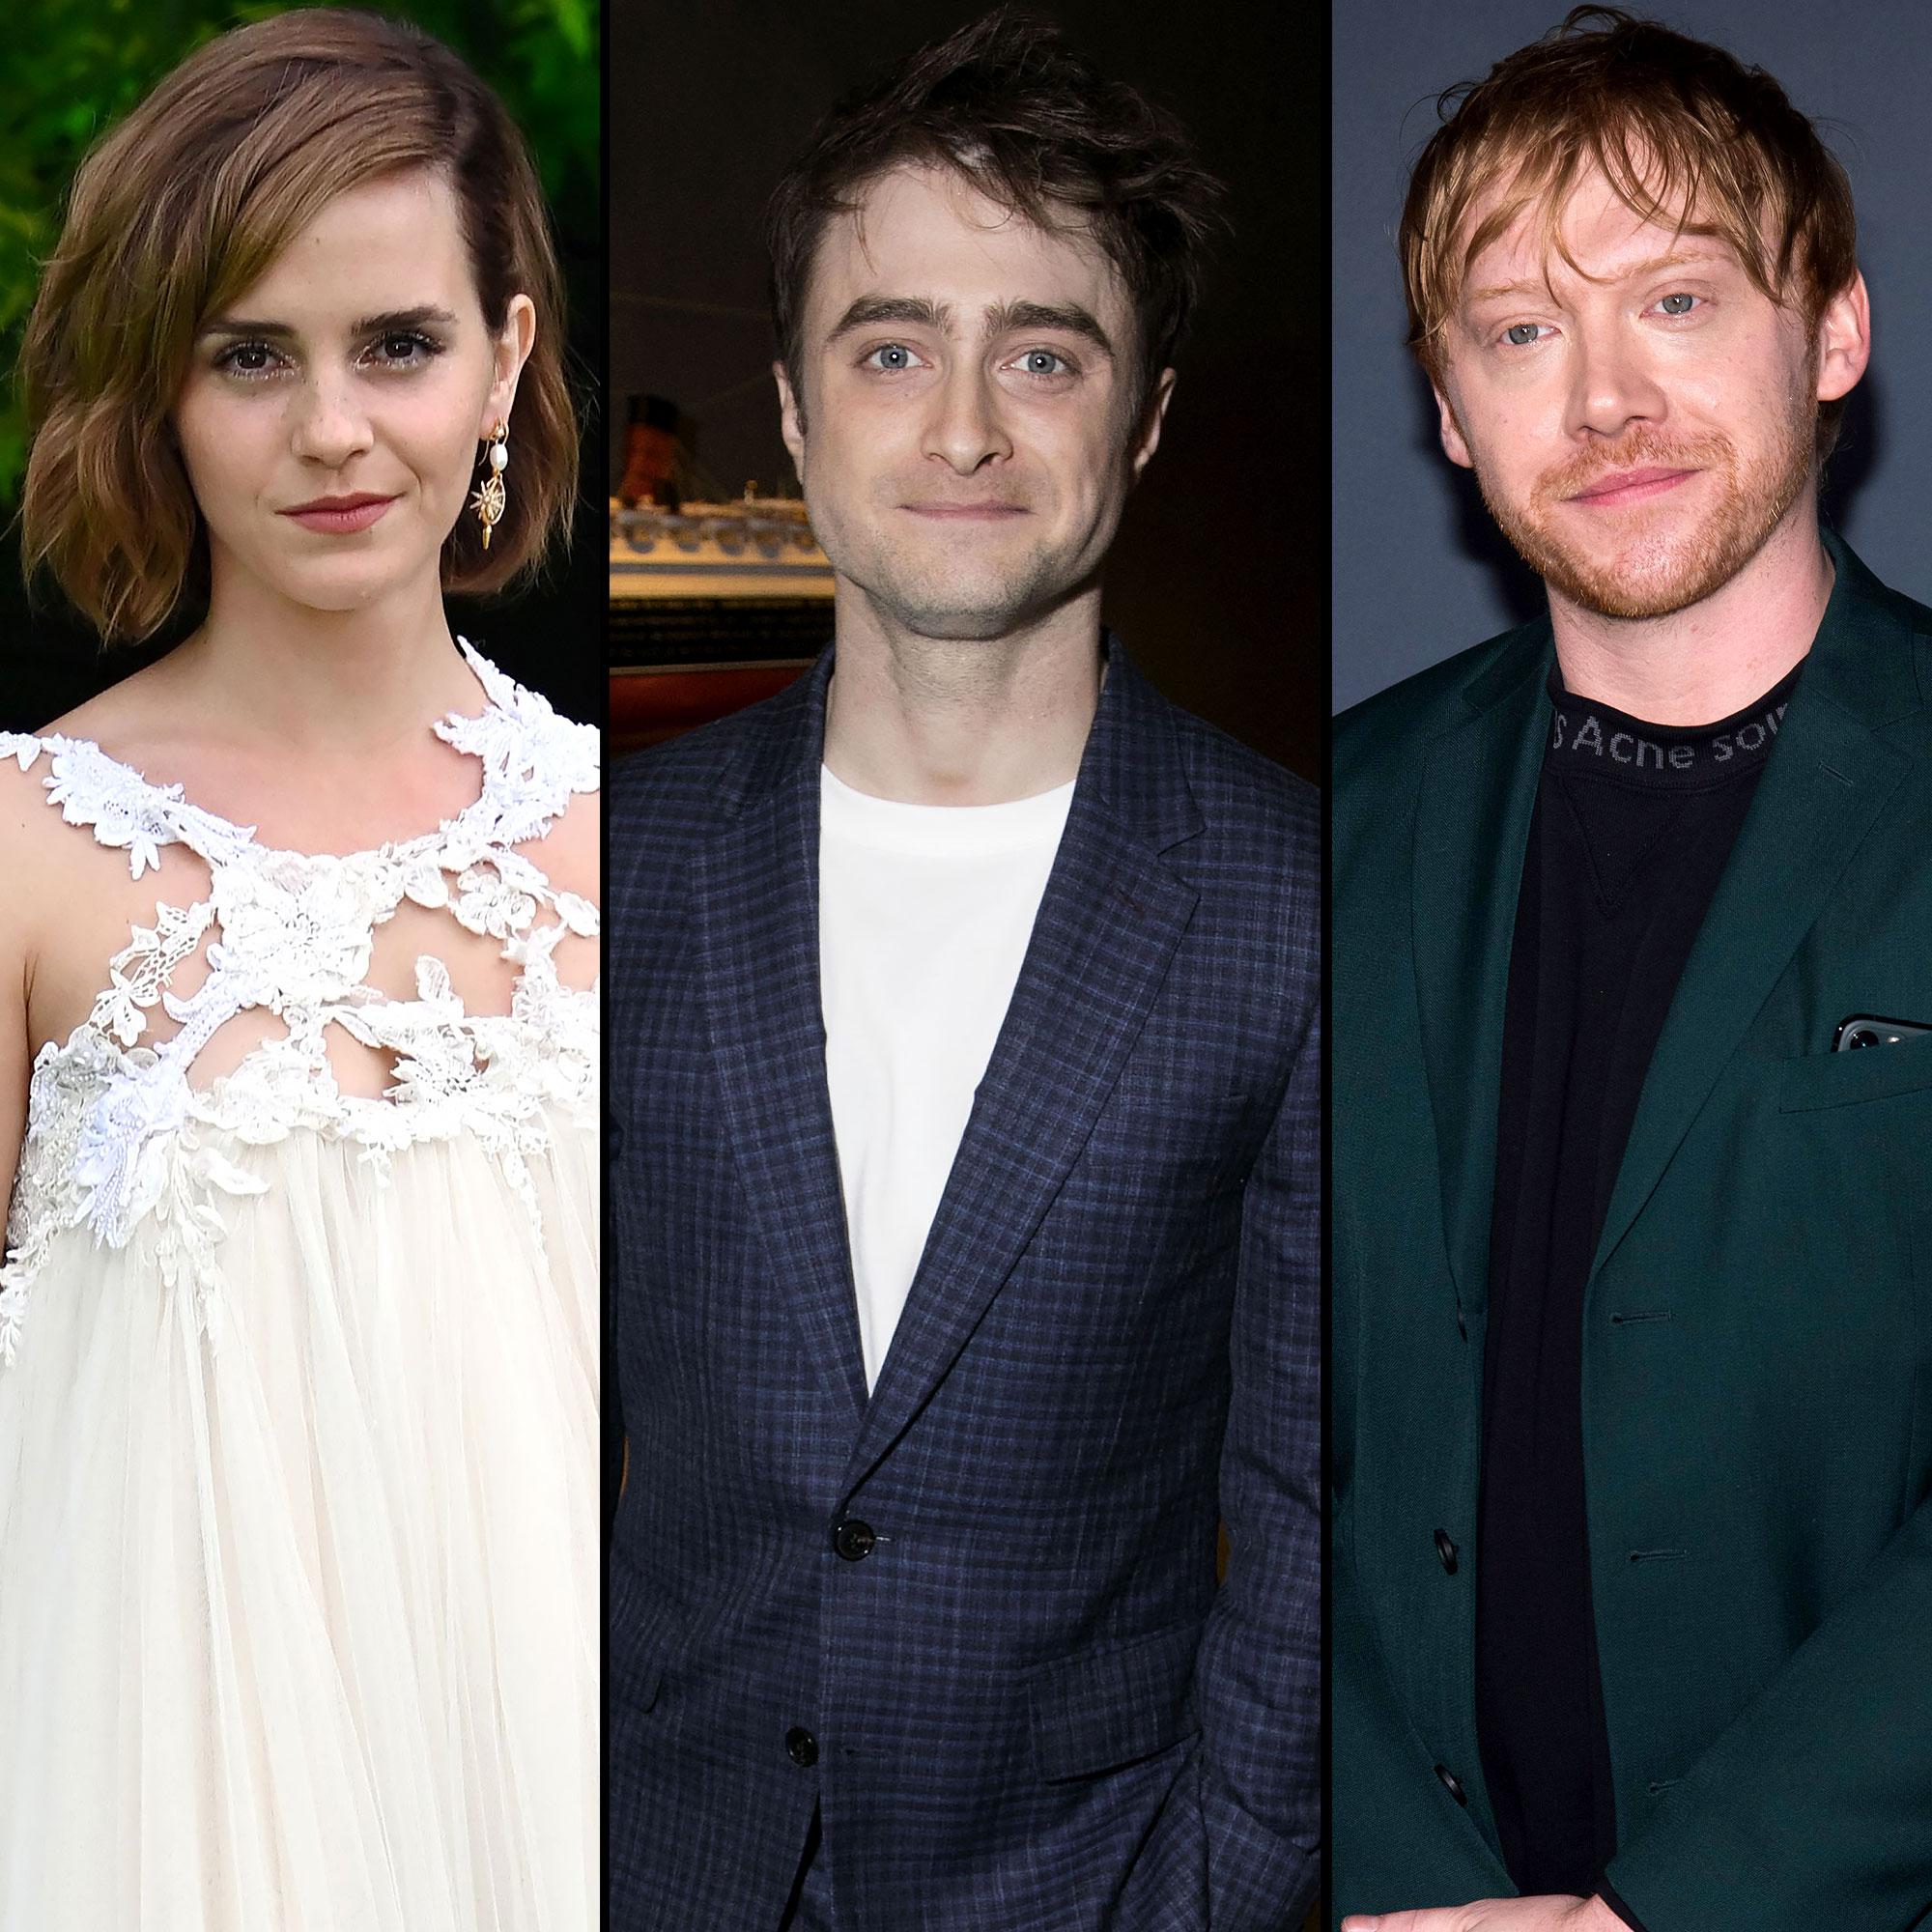 Watch Return to Hogwarts Online: Stream Harry Potter Reunion HBO Max